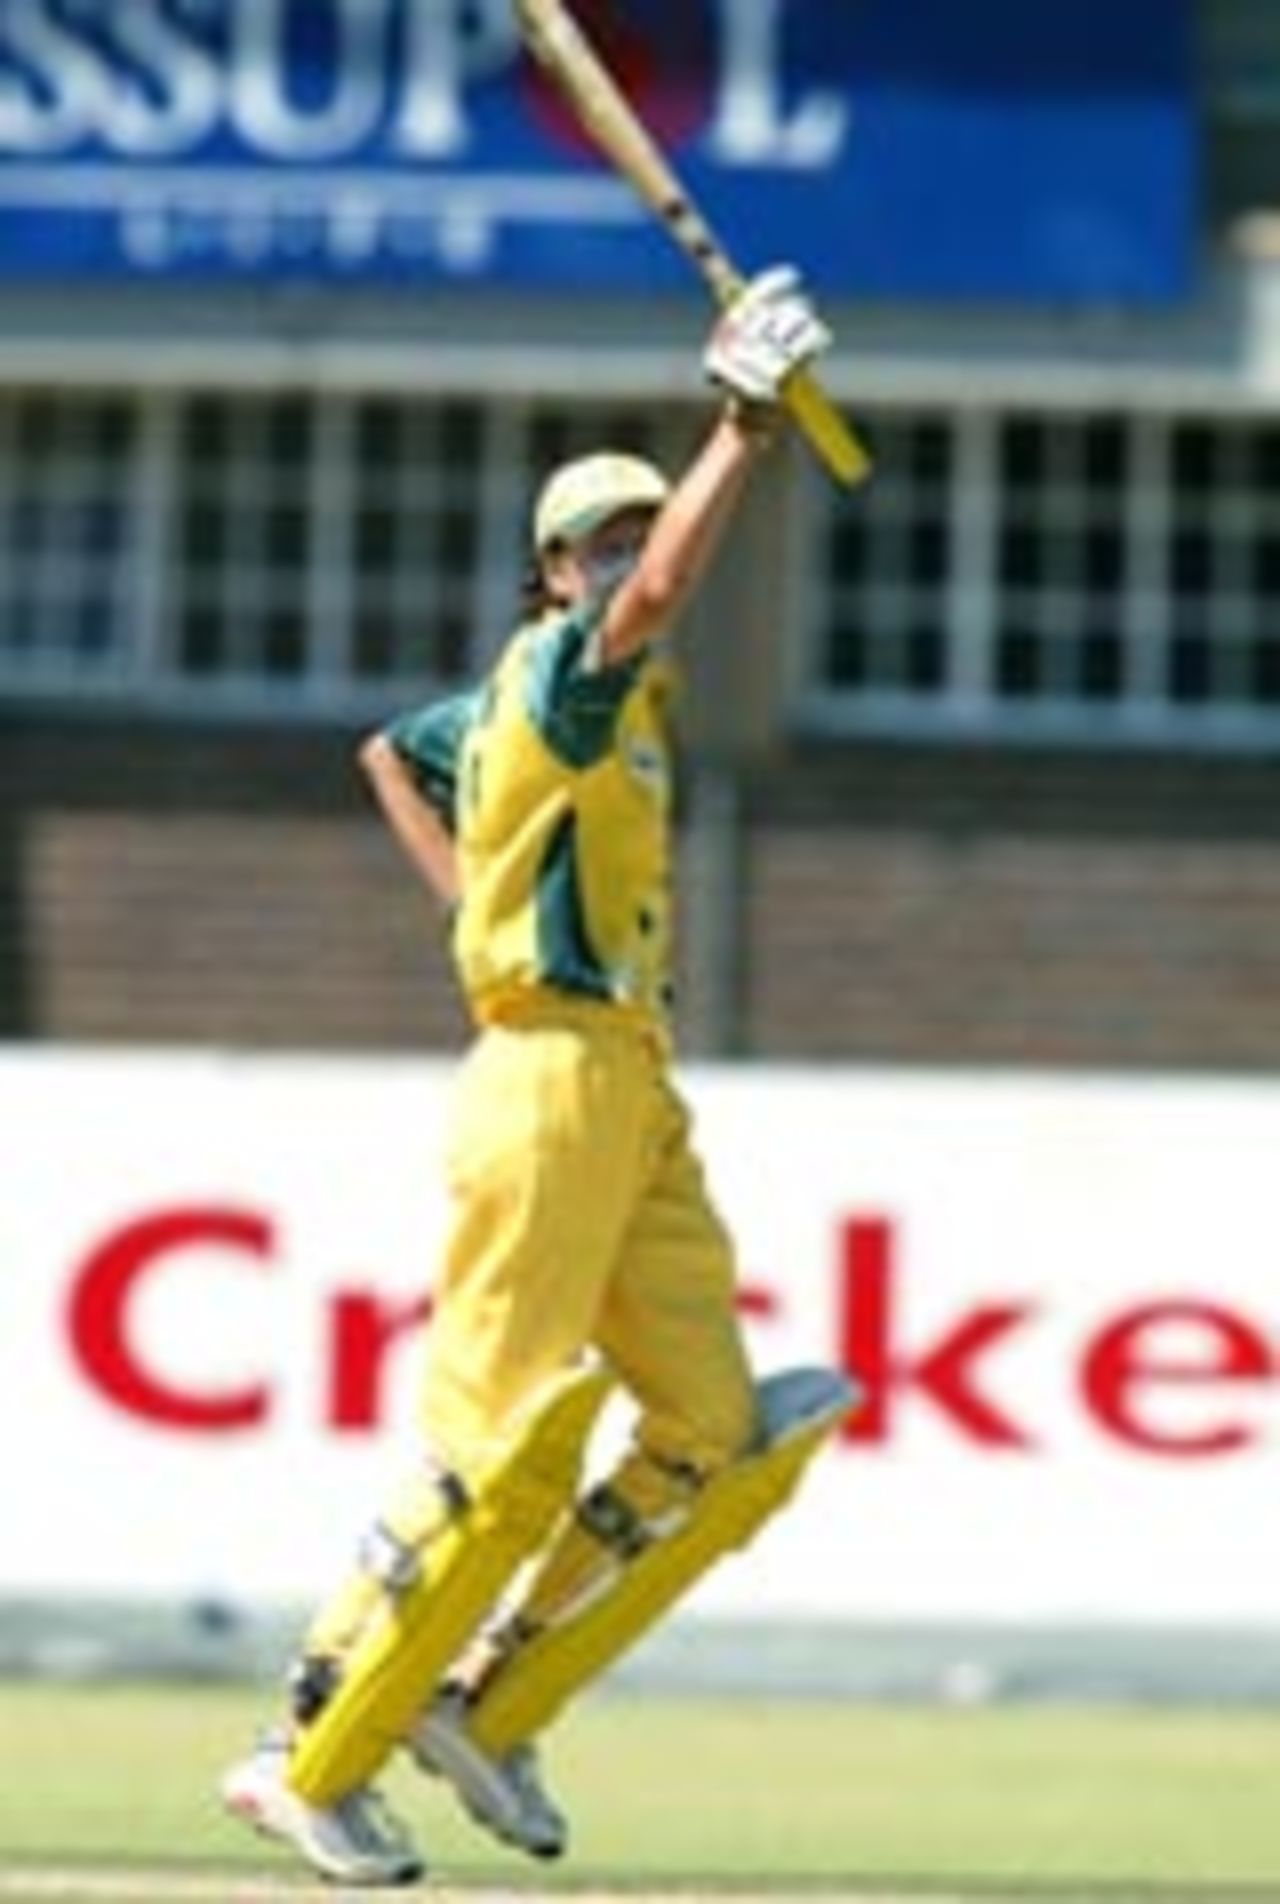 Lisa Keightley scores a century for Australia against South Africa, Women's World Cup, March 28, 2005